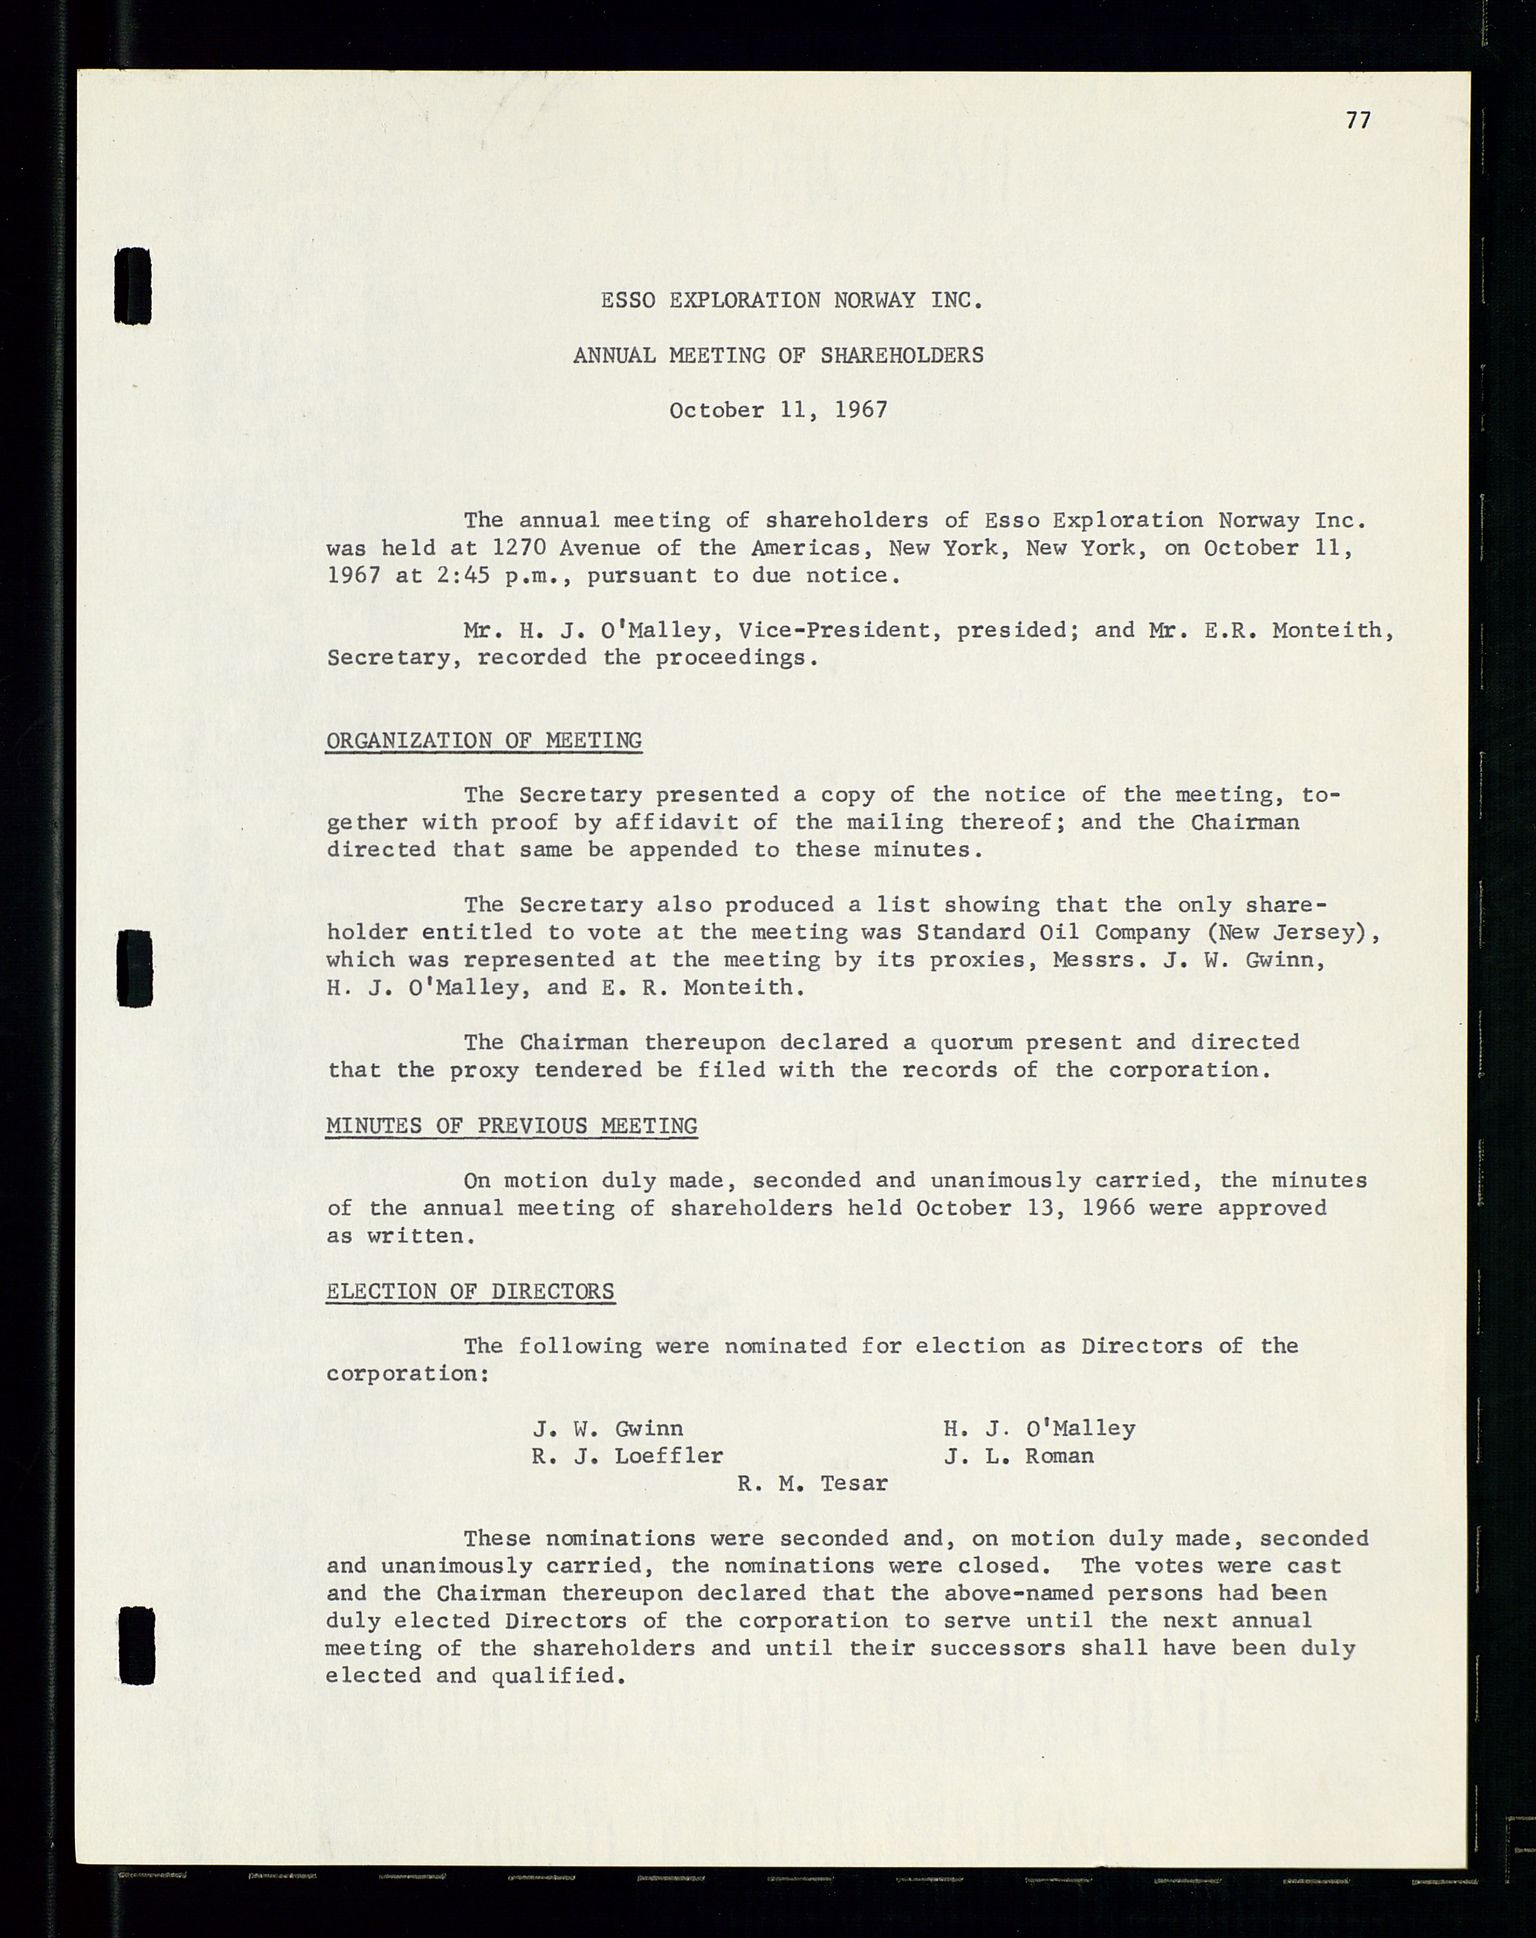 Pa 1512 - Esso Exploration and Production Norway Inc., SAST/A-101917/A/Aa/L0001/0001: Styredokumenter / Corporate records, By-Laws, Board meeting minutes, Incorporations, 1965-1975, p. 77